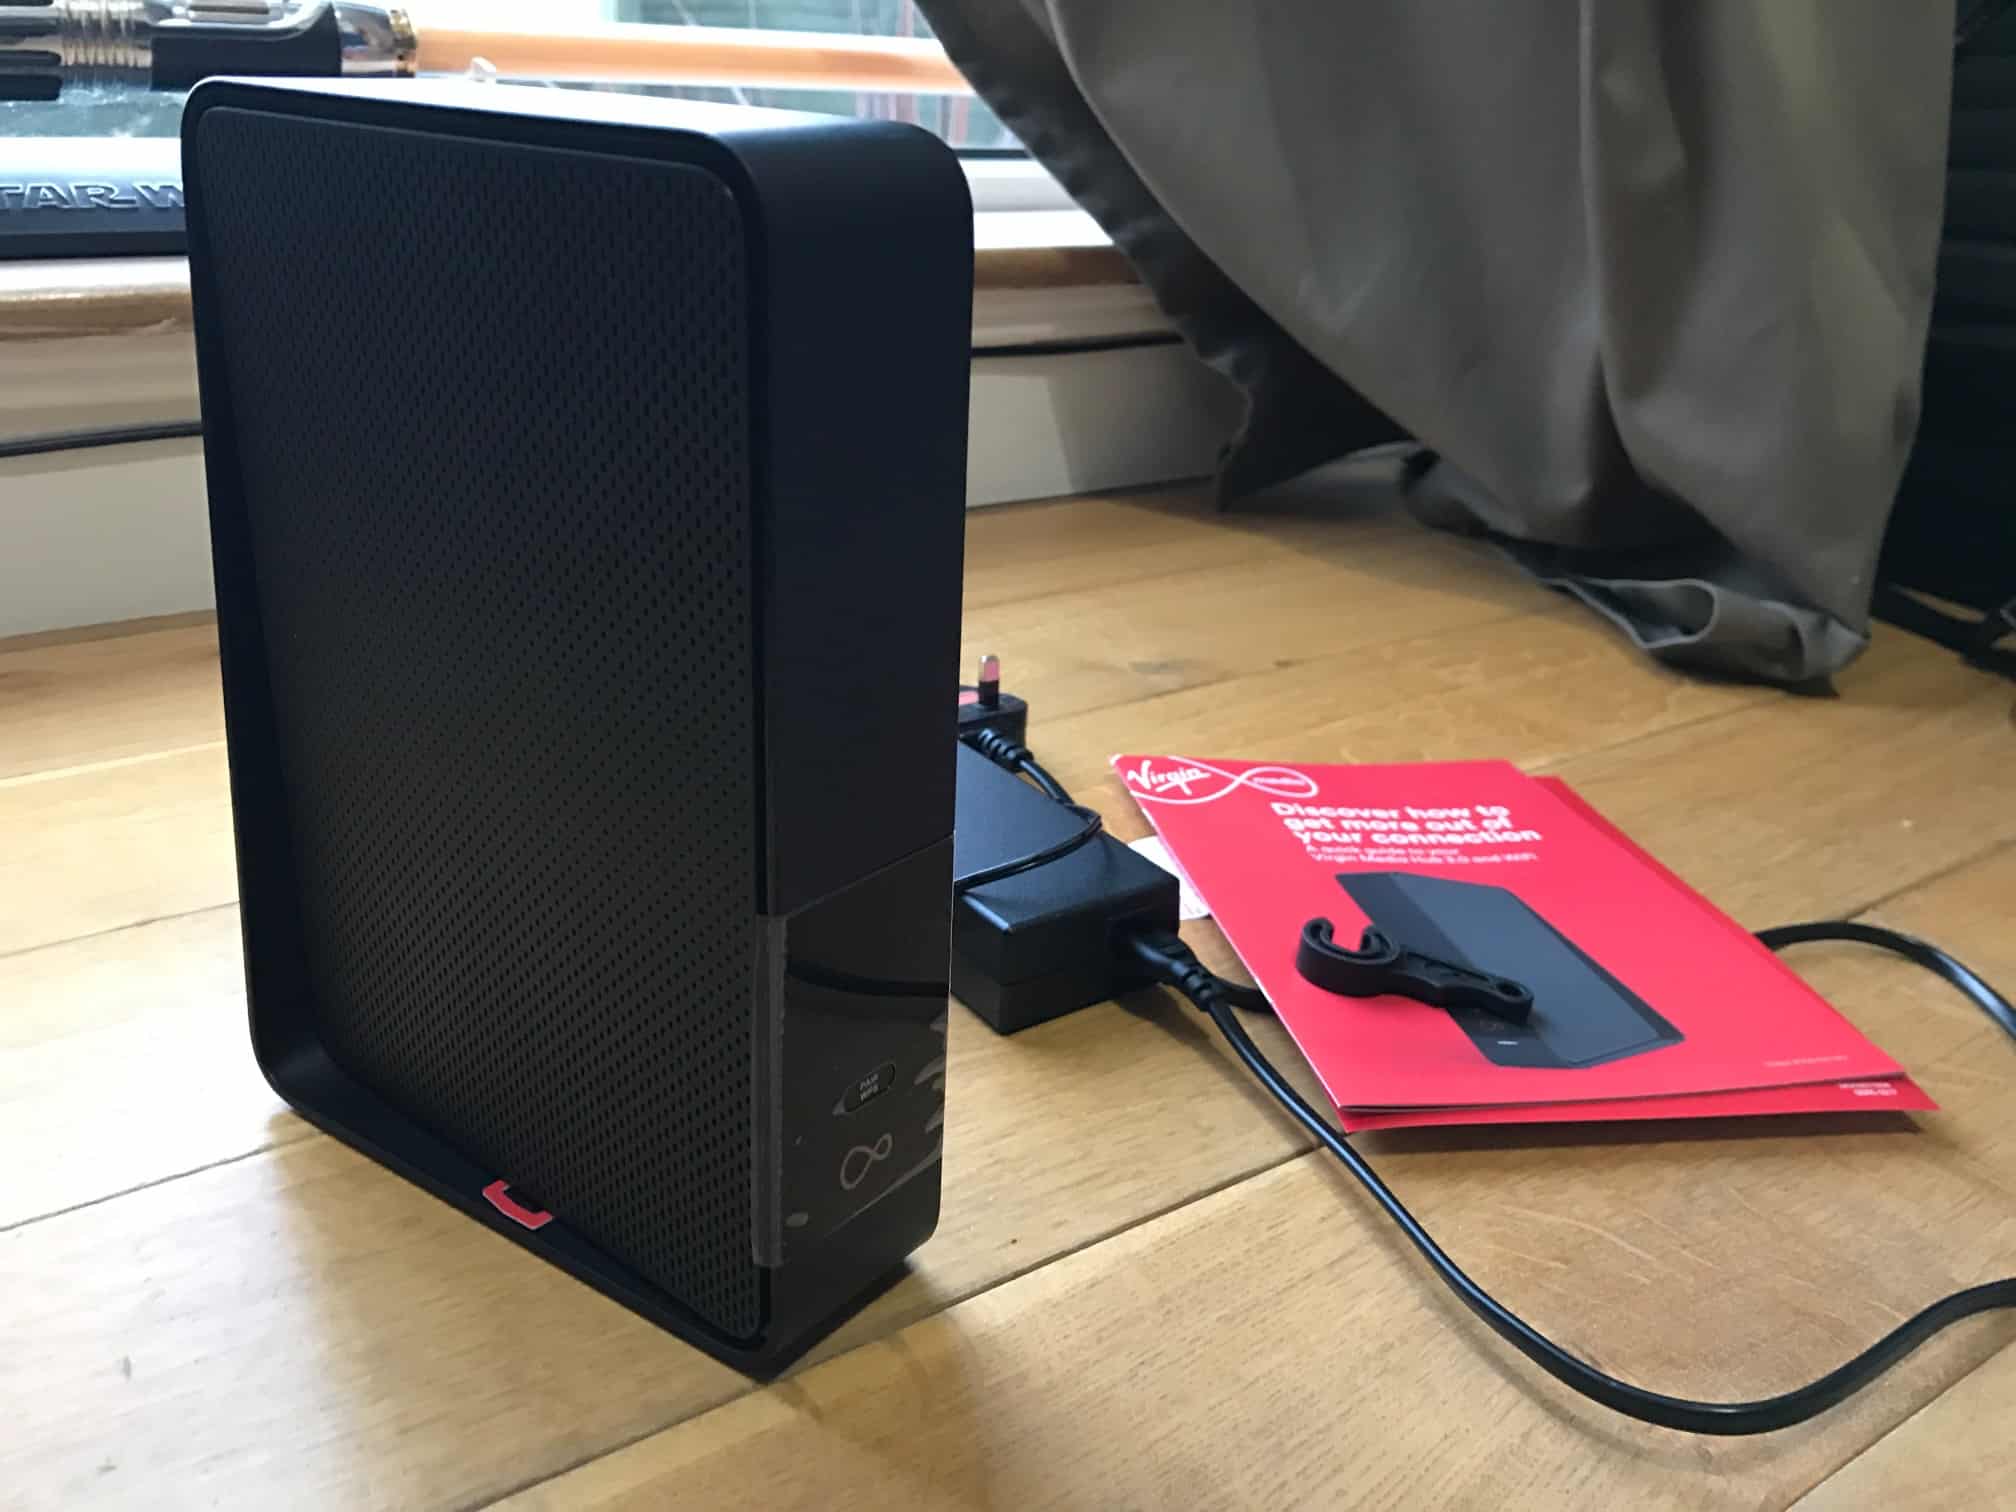 How To Set Up Virgin Media Wi-Fi Router